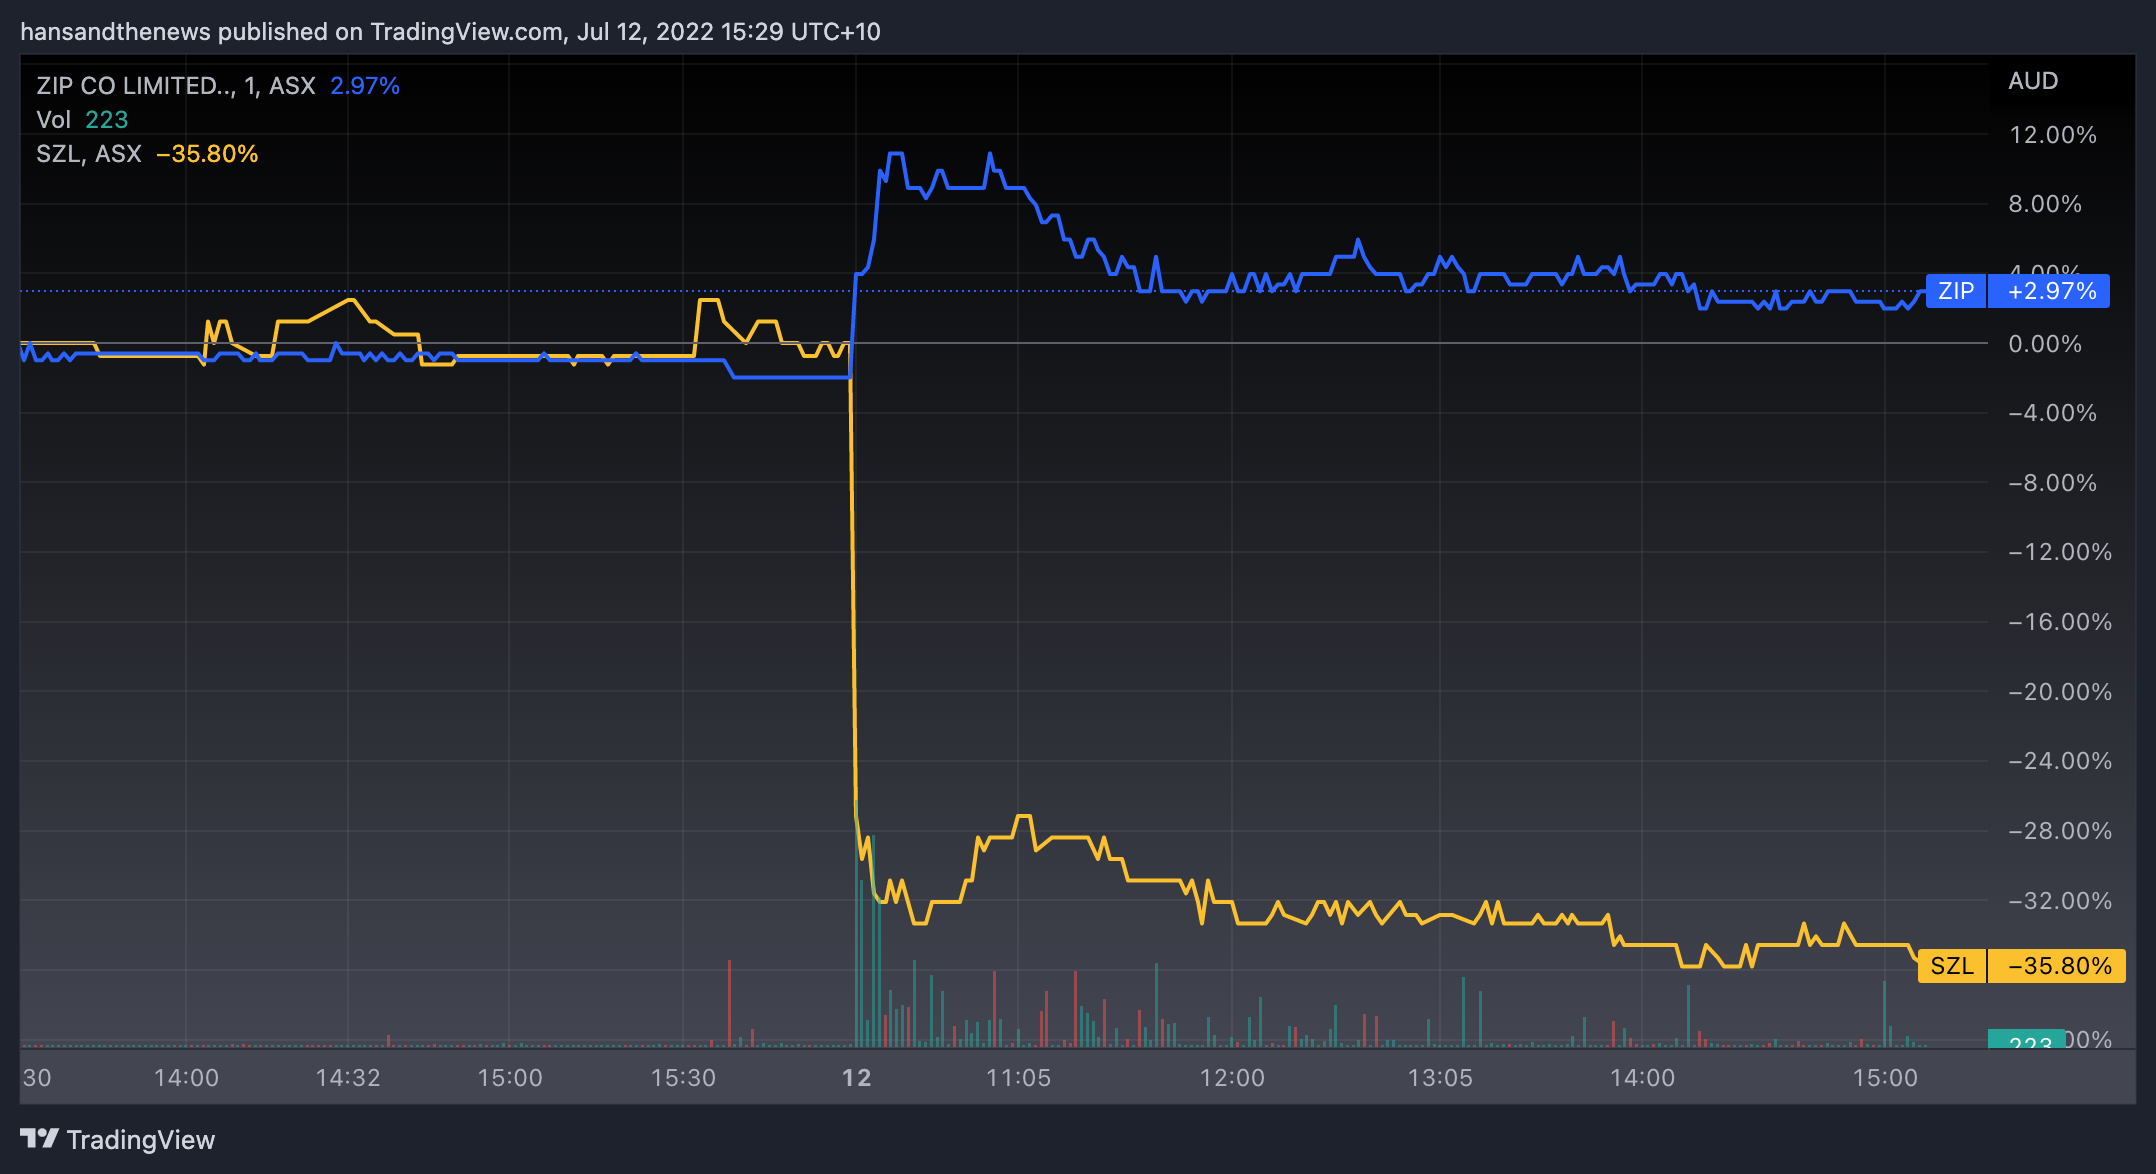 Sezzle shareholders were obviously banking hard on this deal going through. (Source: Trading View)